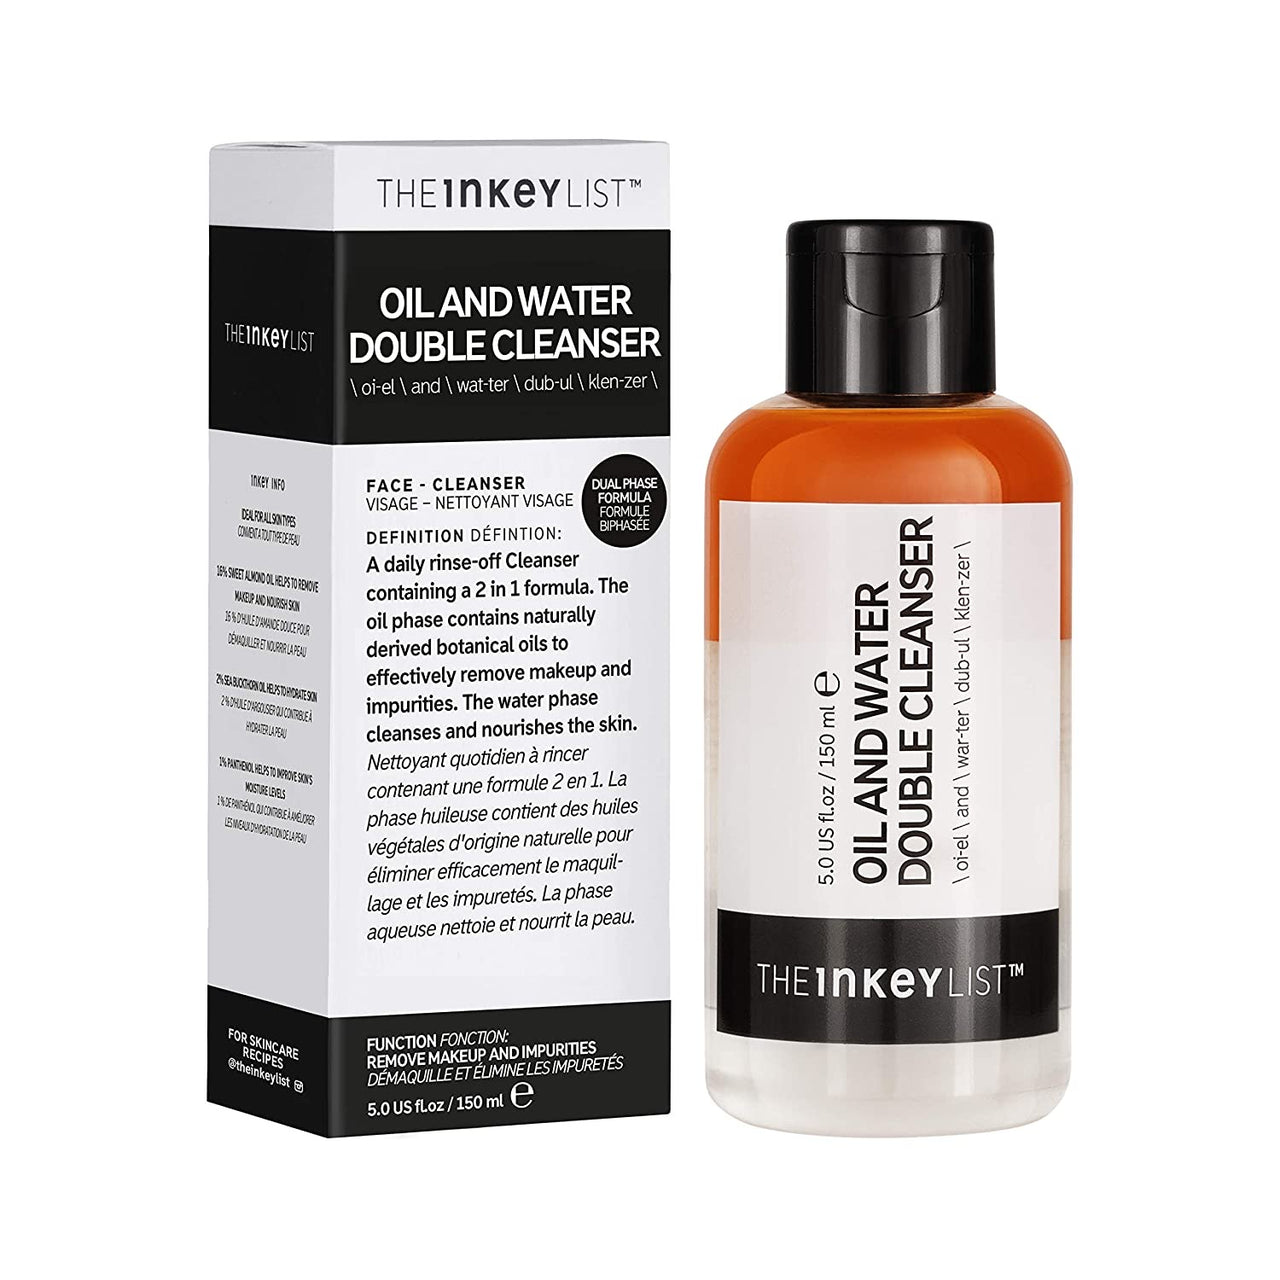 THE INKEY LIST- Oil & Water Double Cleanser